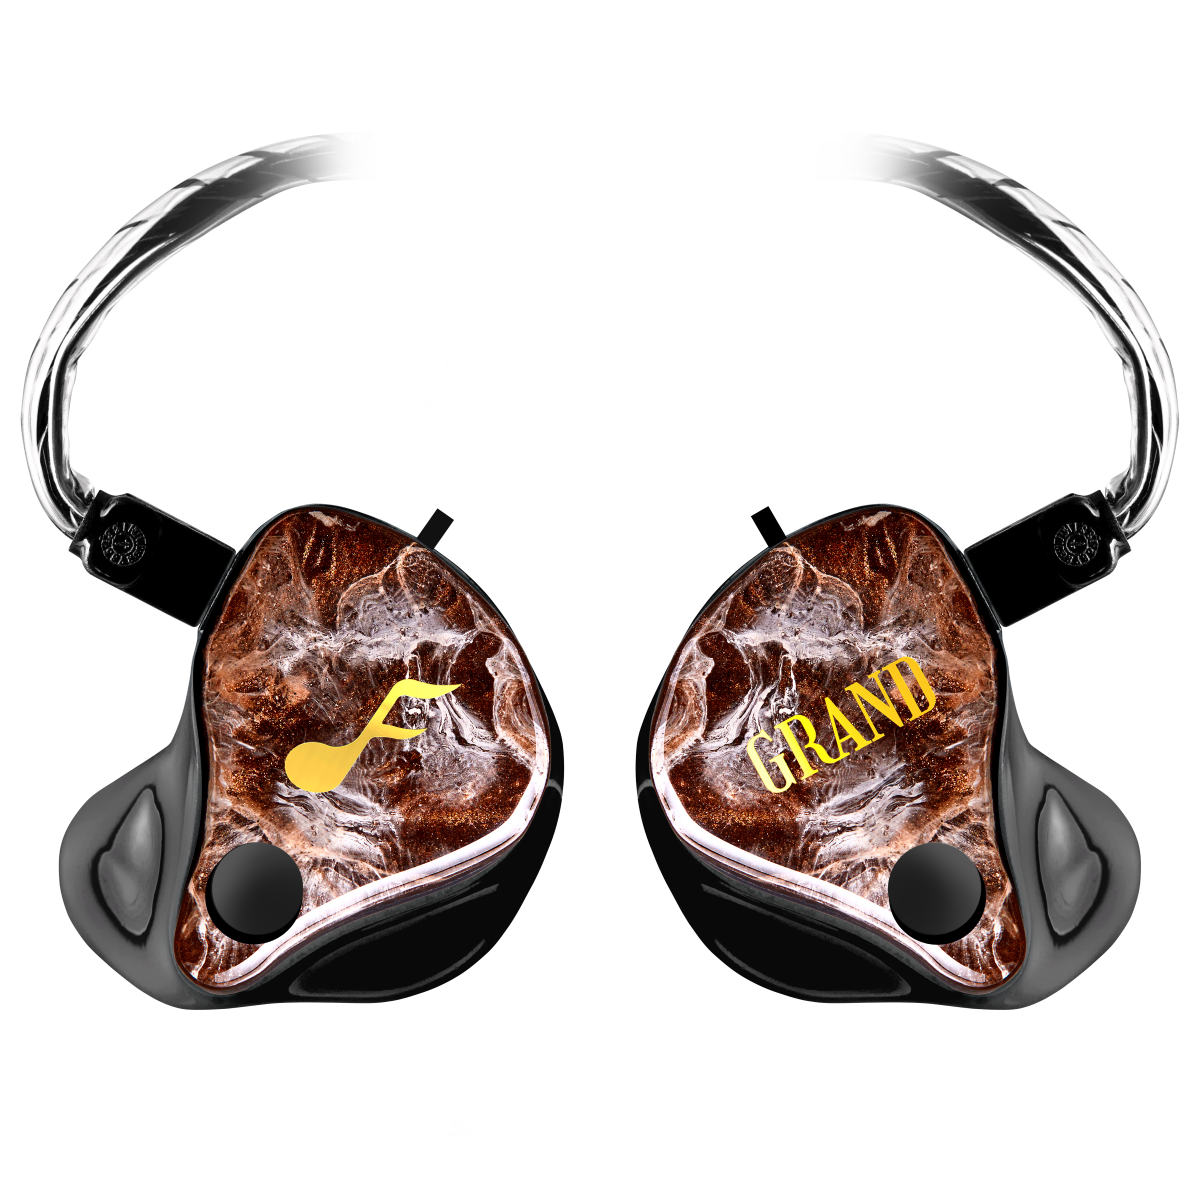 GRAND Maestro Custom IEM - Prices from 4524.00 to 4628.00